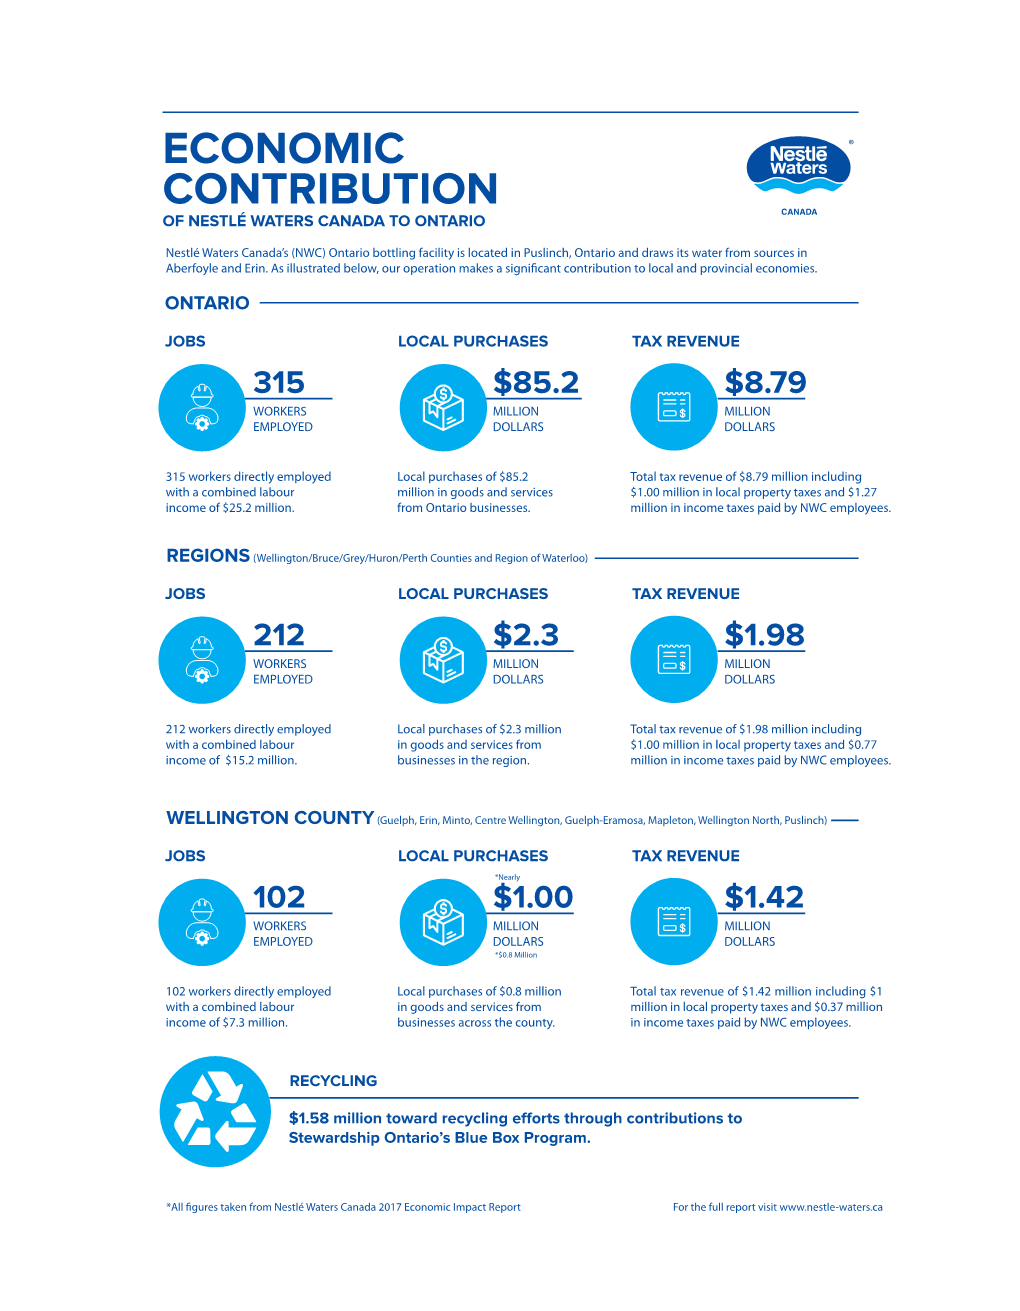 Economic Contribution of Nestlé Waters Canada to Ontario